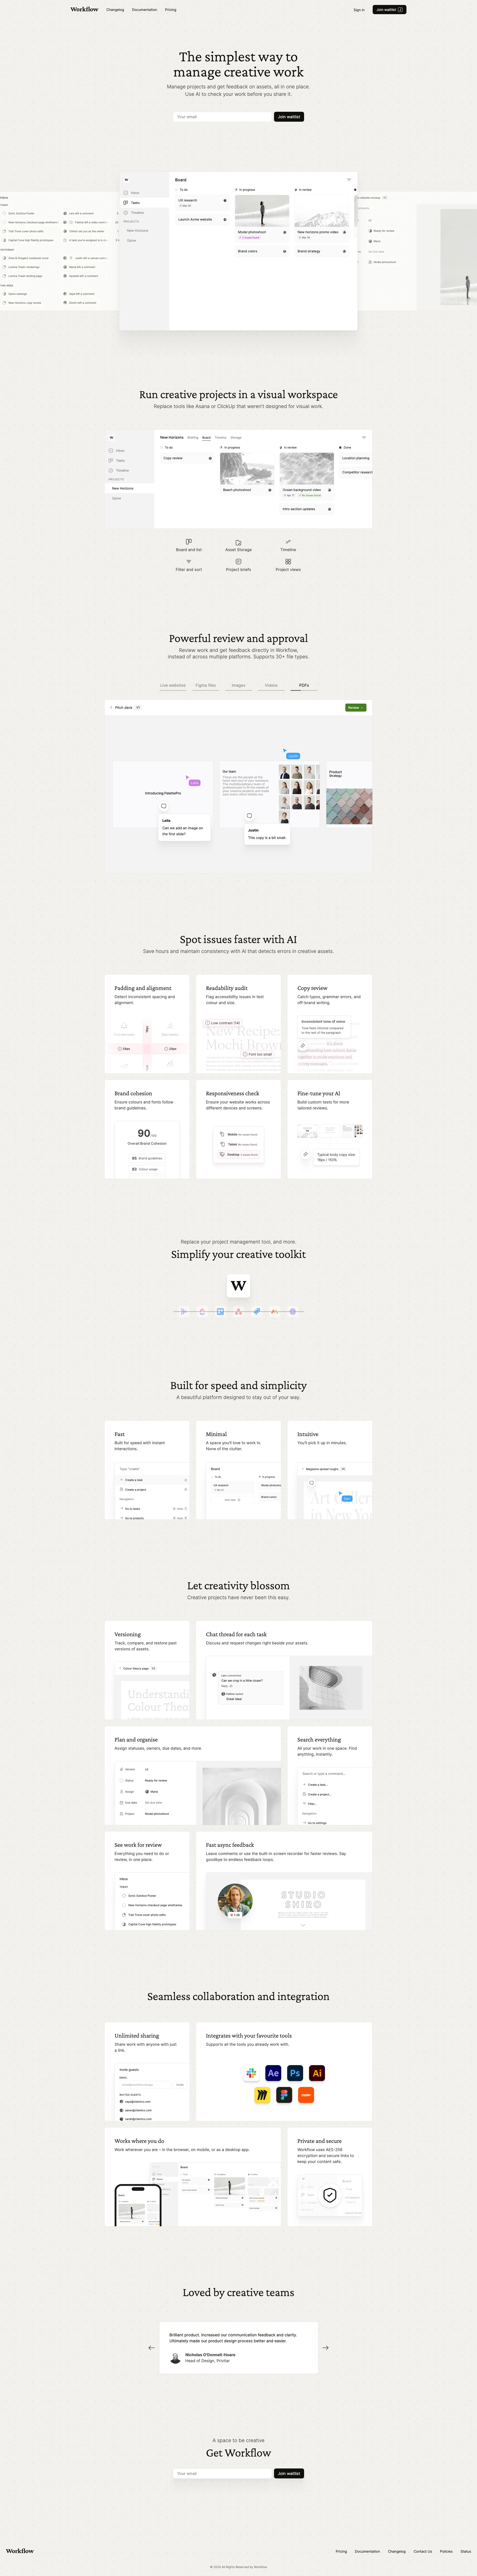 Workflow Landing Page Example: The simplest way to manage creative work. Manage projects and get feedback on work, all in one place. AI checks your work before you share it.